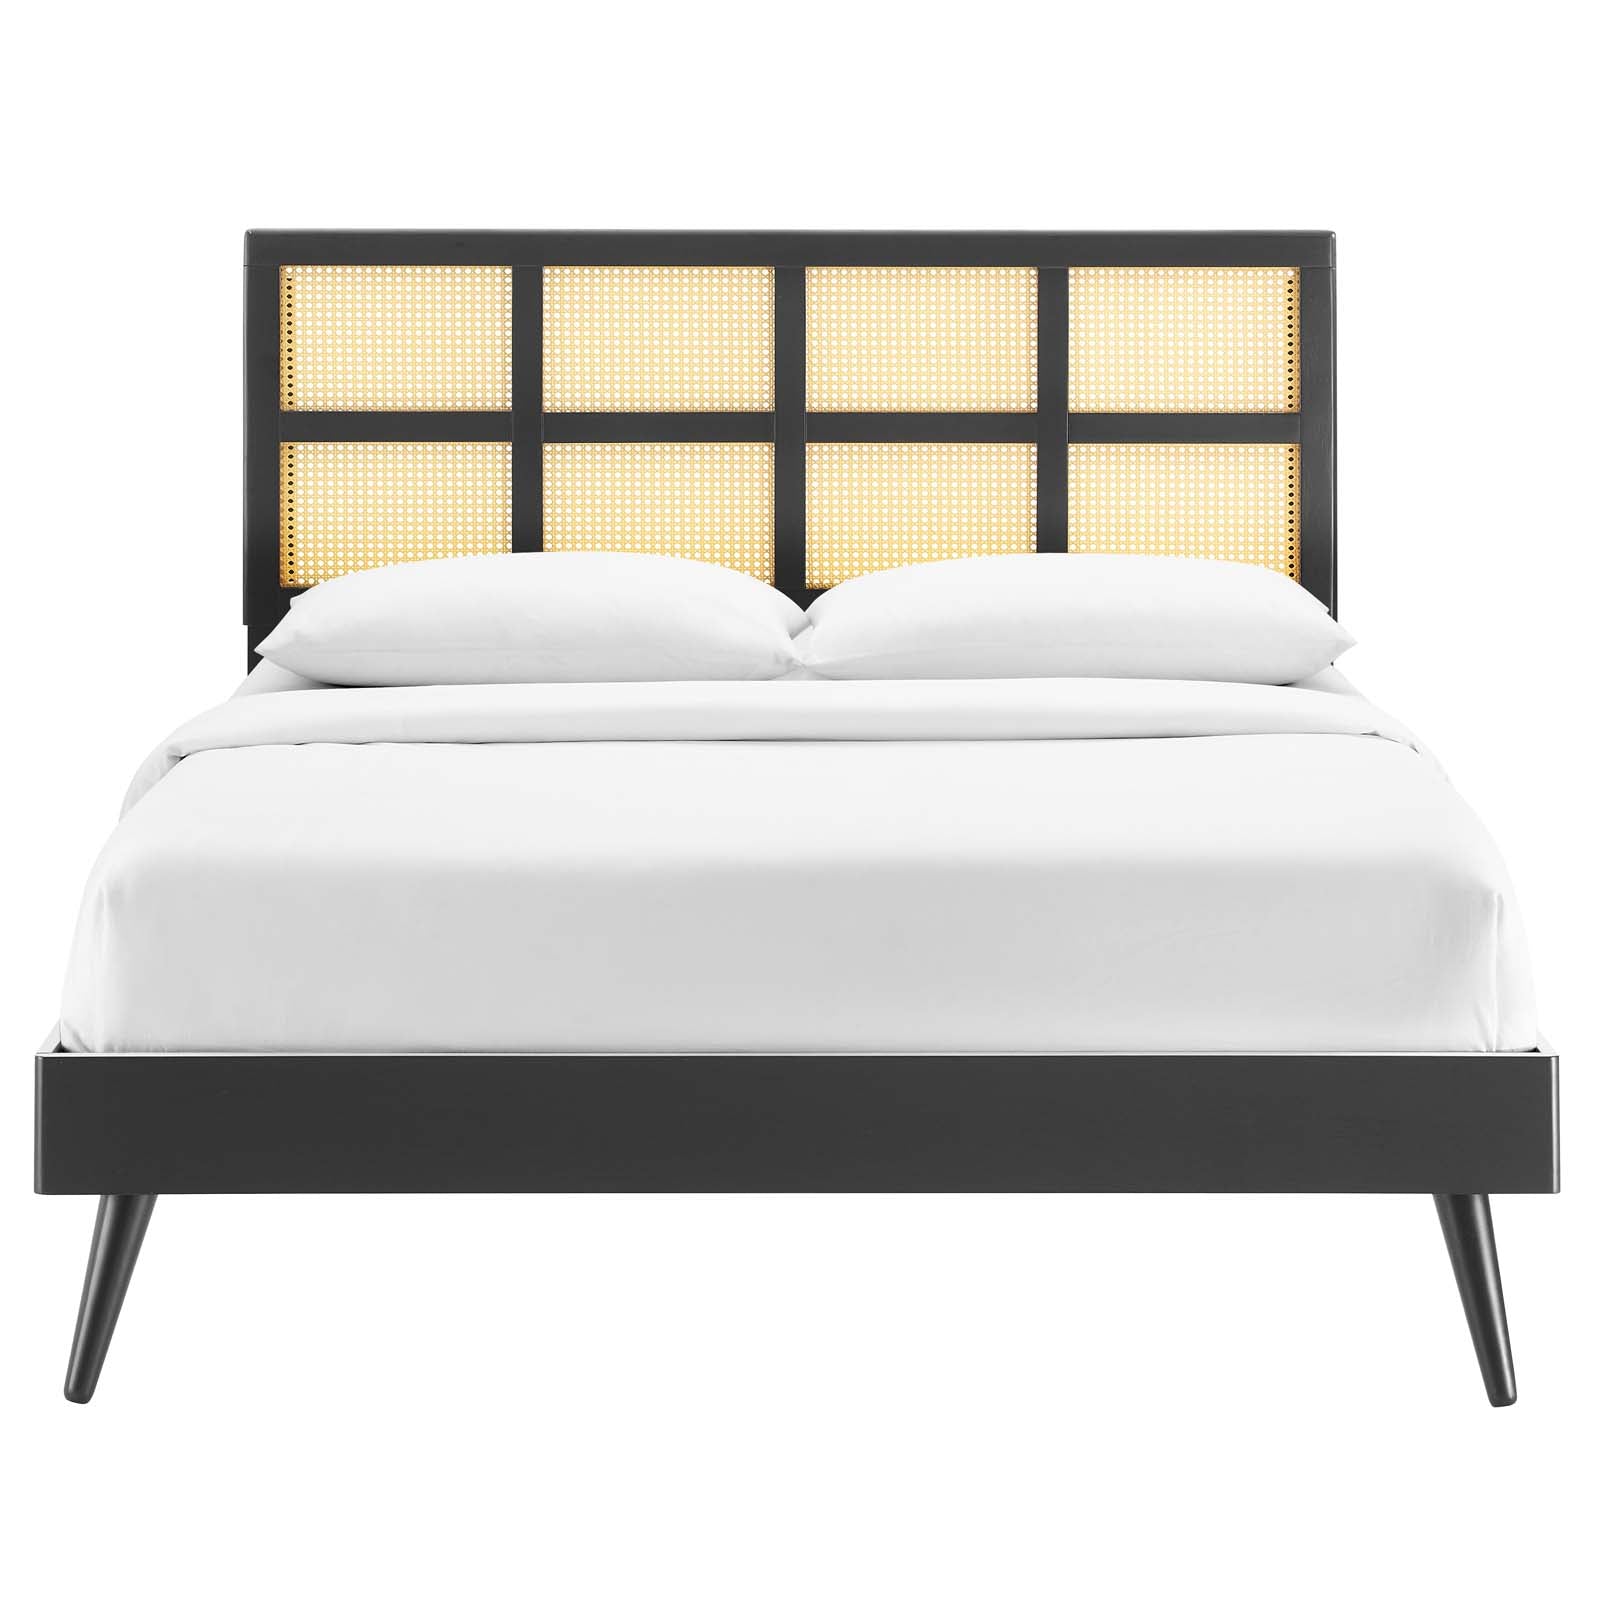 Sidney Cane and Wood King Platform Bed With Splayed Legs - East Shore Modern Home Furnishings